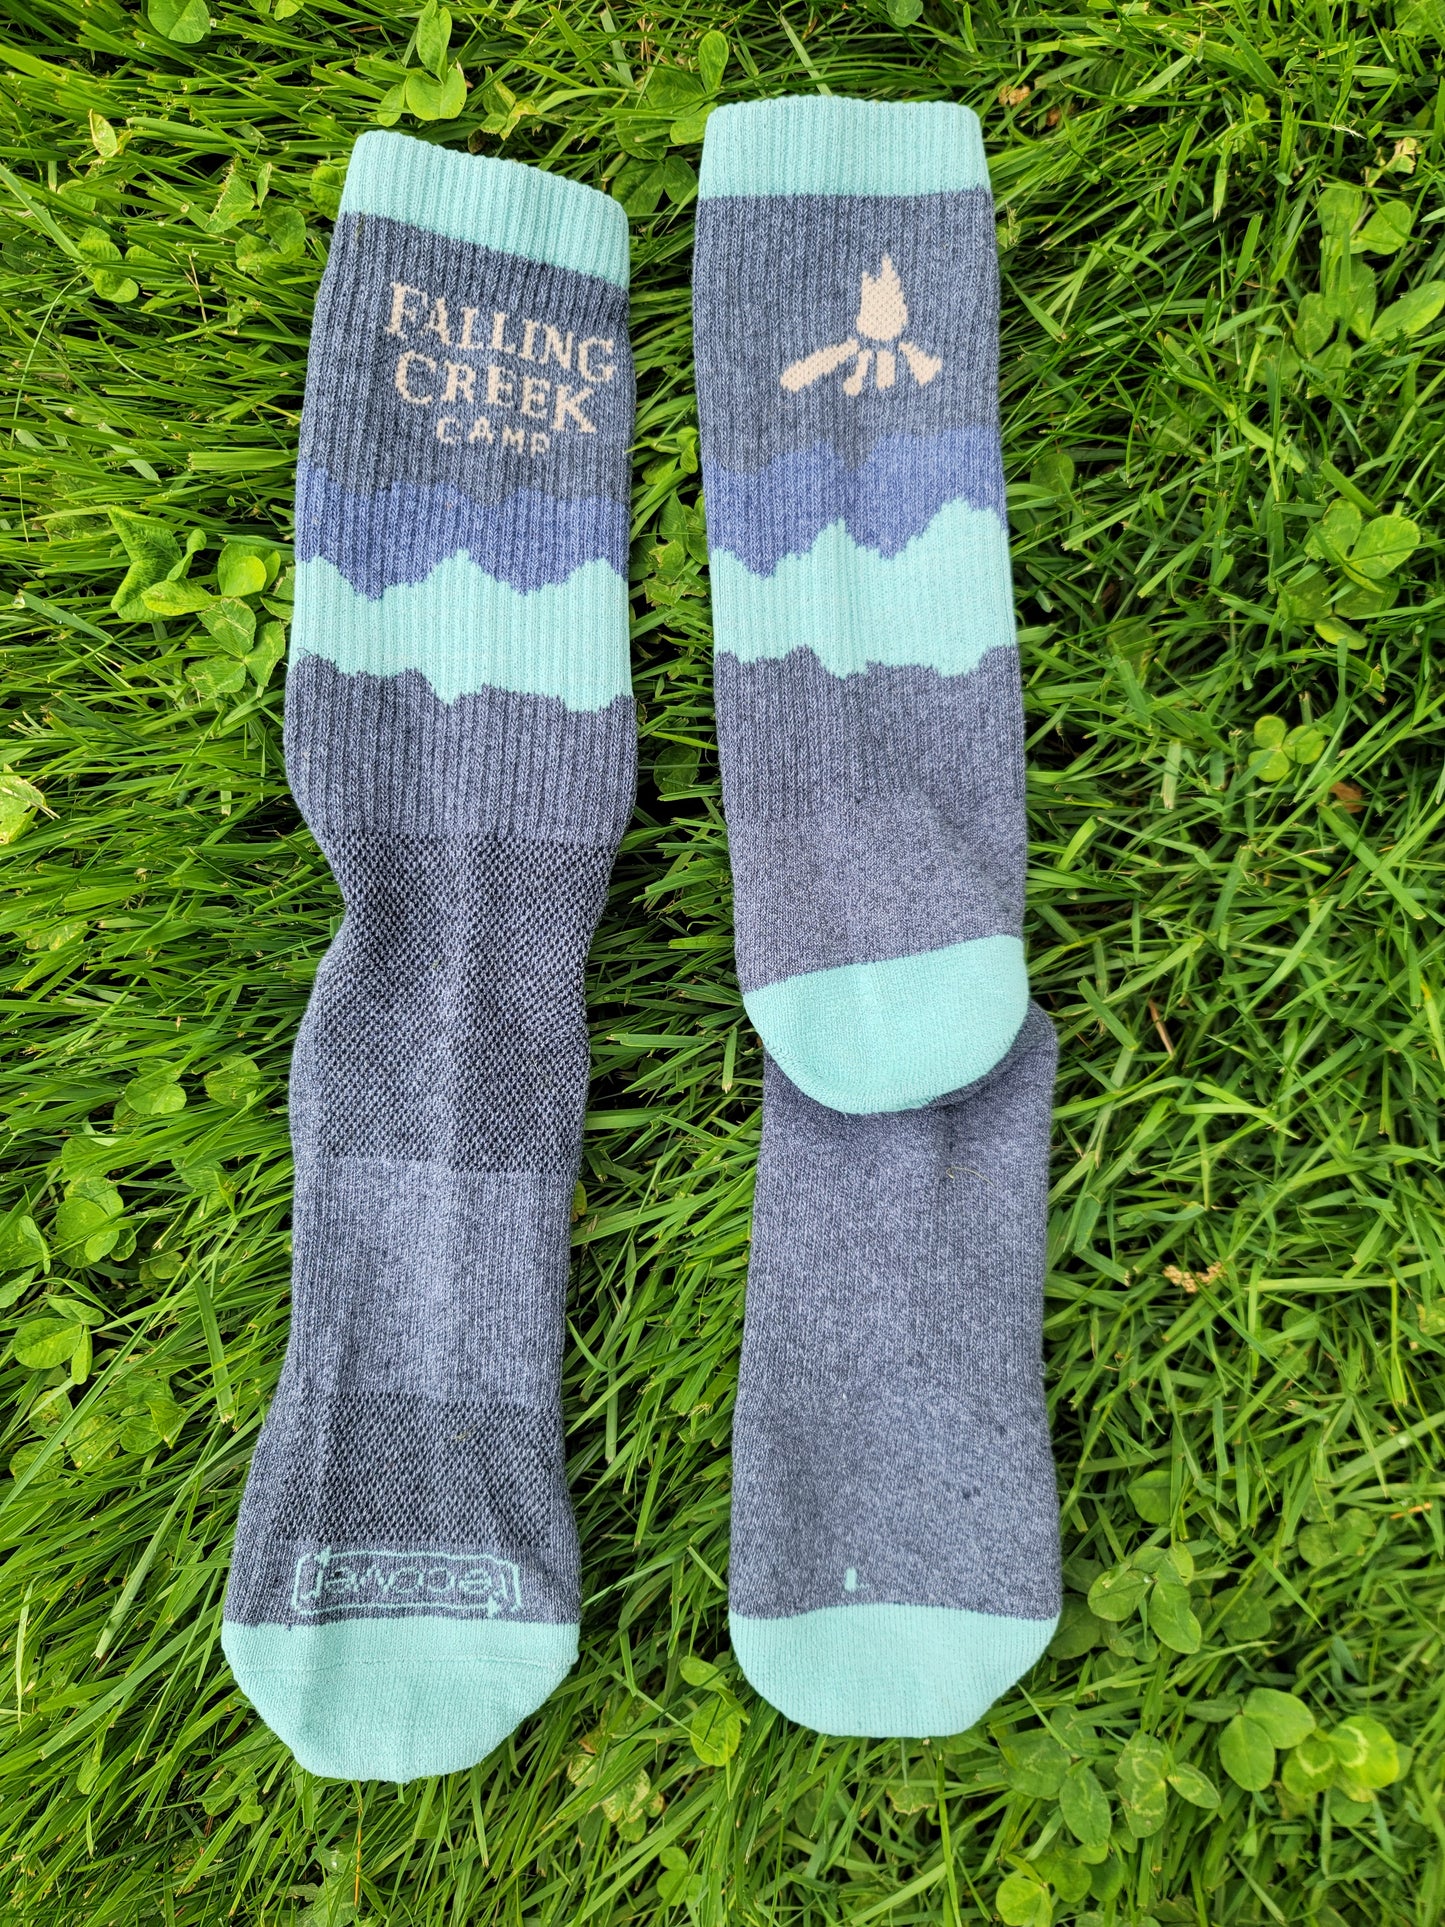 Socks - Grey and Green Recover Brand, Made in NC From Recycled Materials (USA)